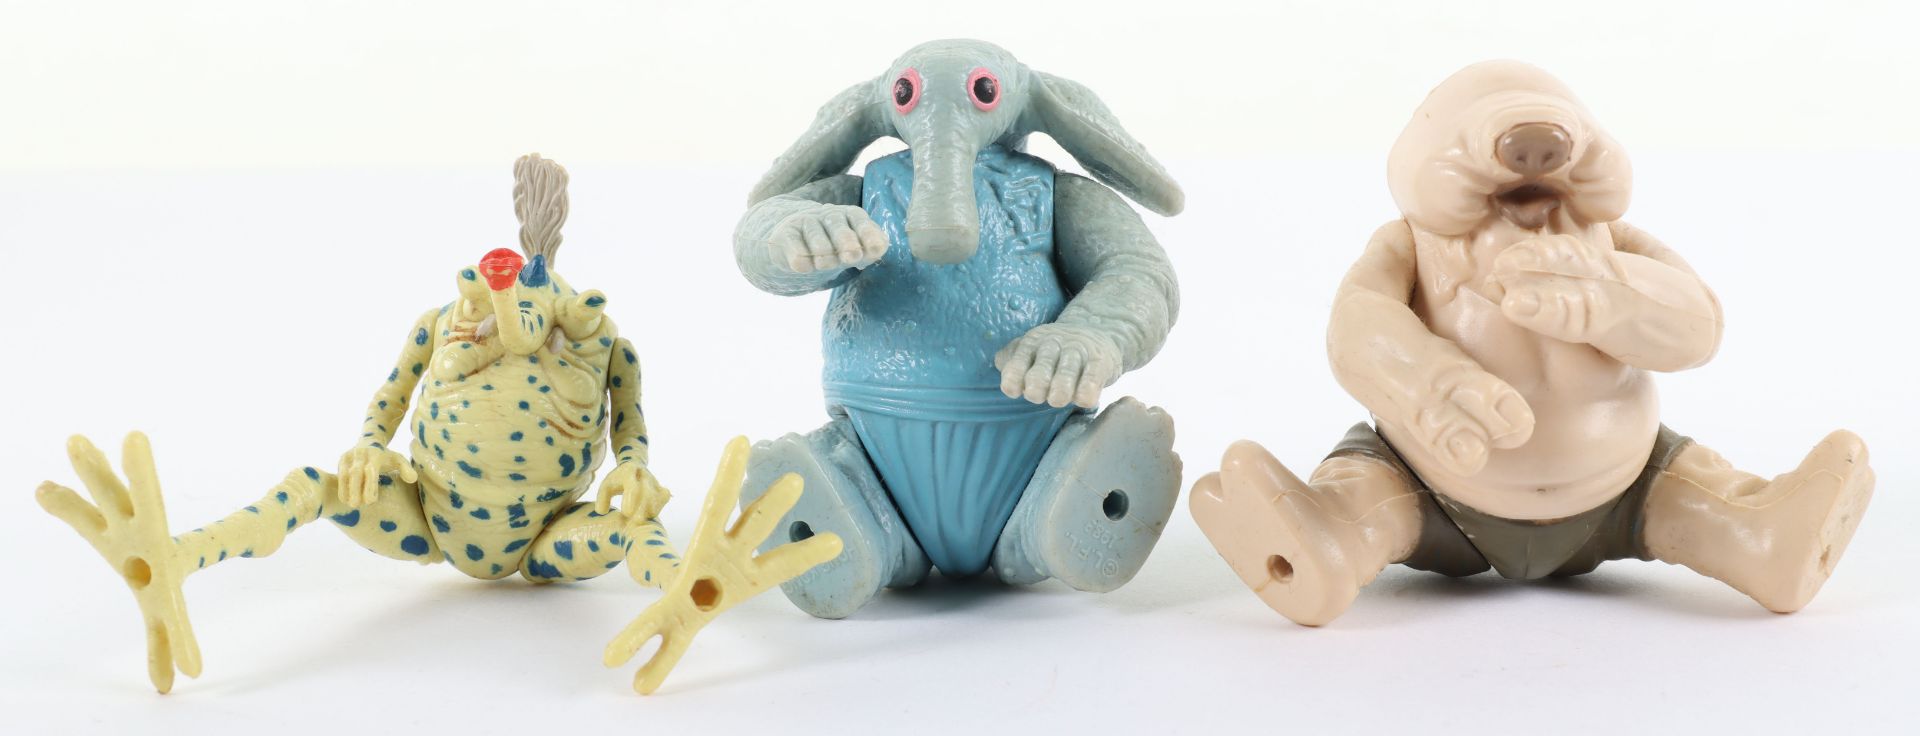 Vintage Star Wars Return of The Jedi Sy Snootles and the Rebo Band loose - Image 3 of 5